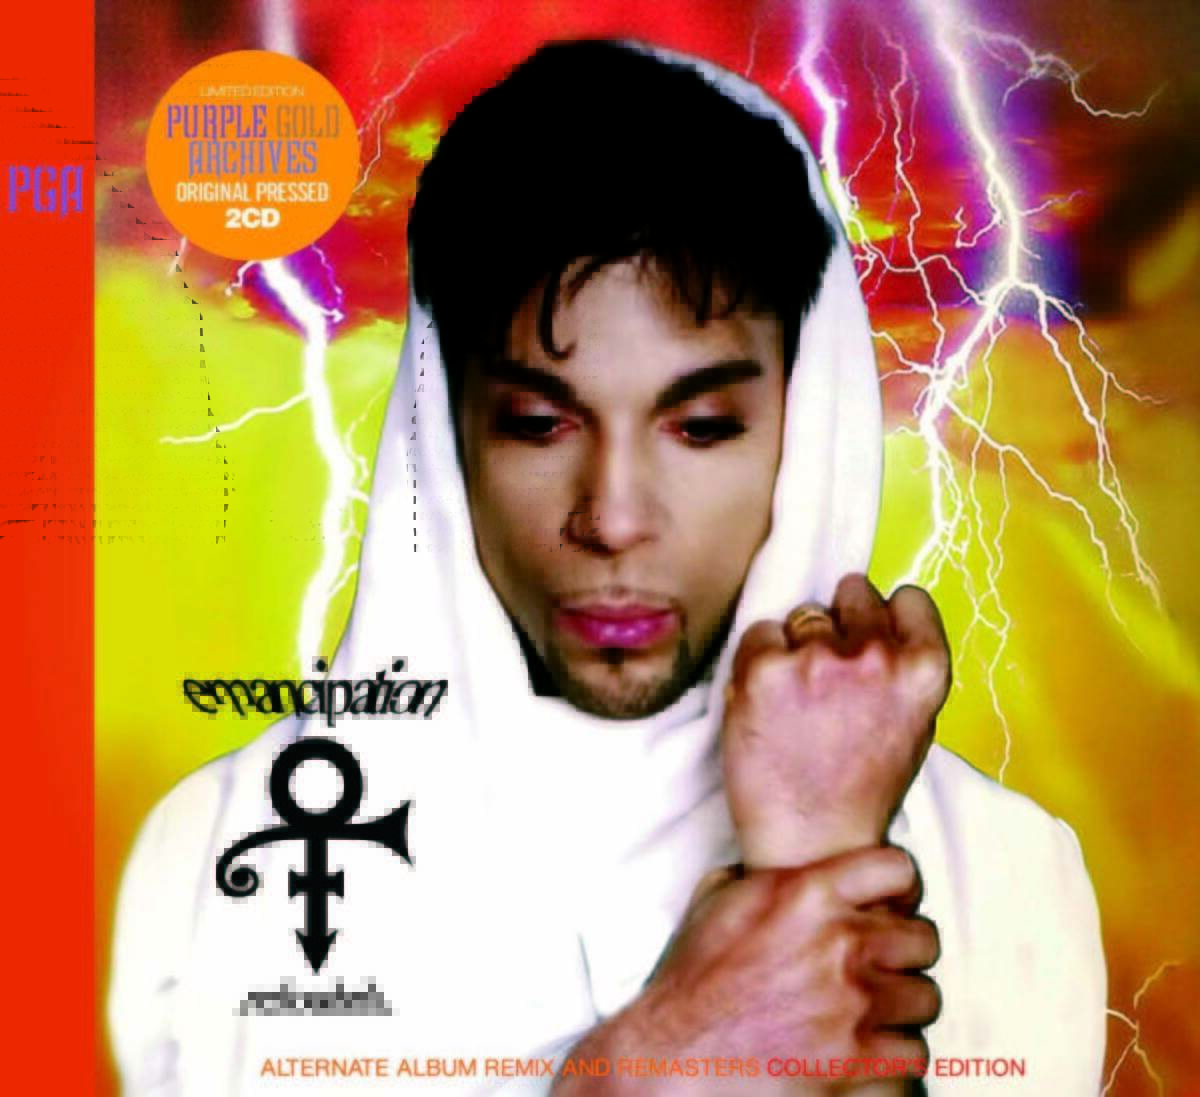 Prince Emancipation Reloaded Alternate Album Remix And Remasters 